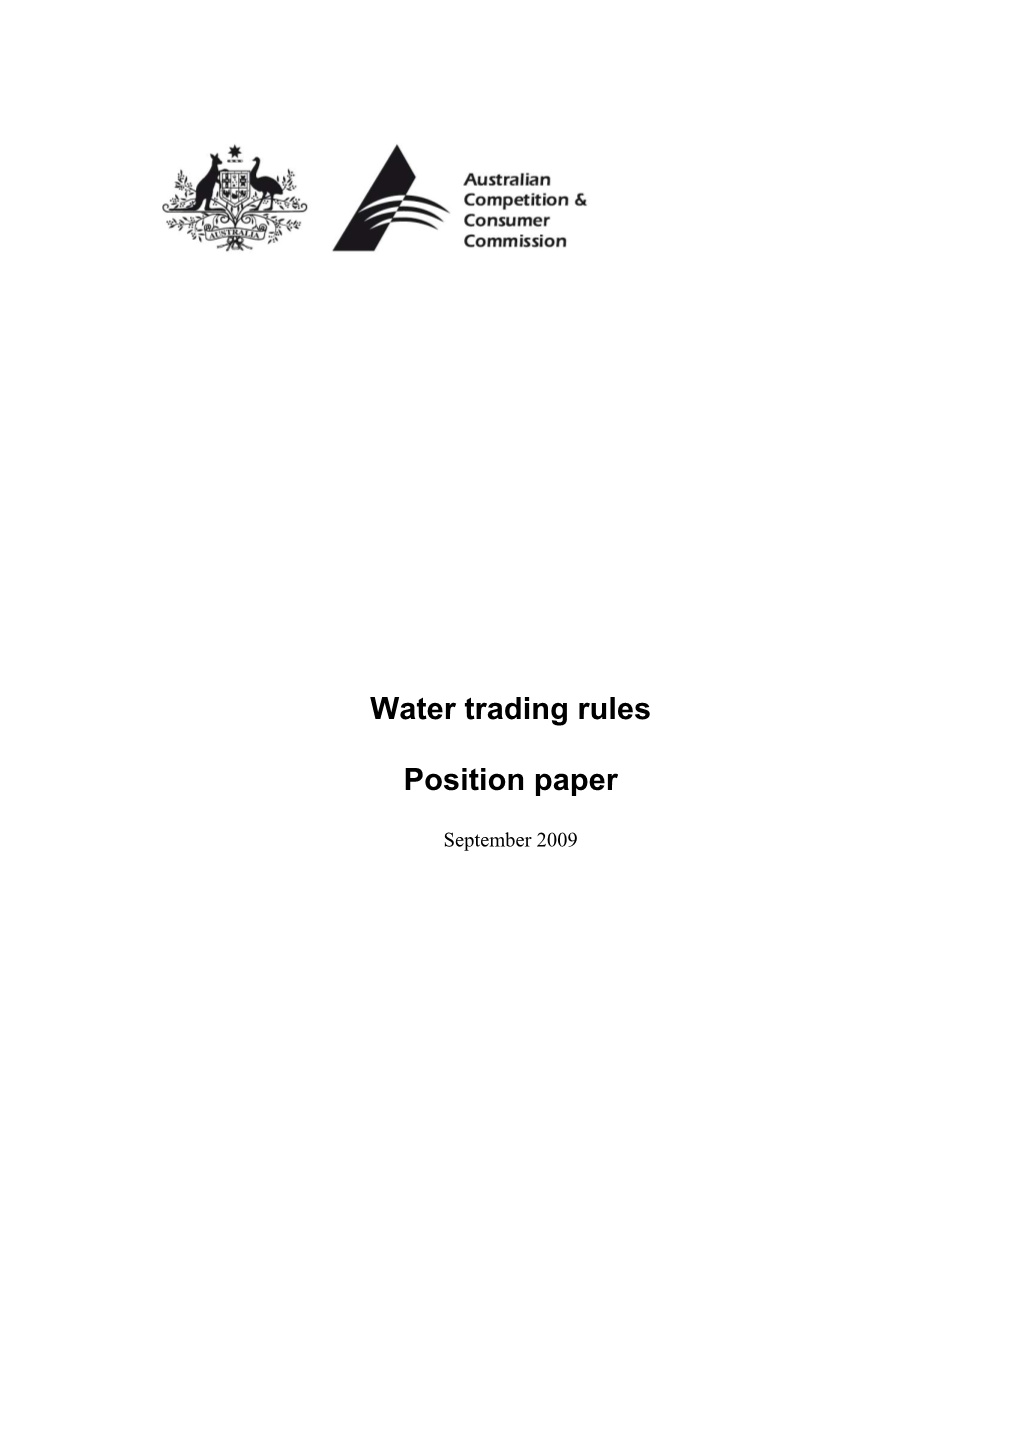 Water Trading Rules Position Paper